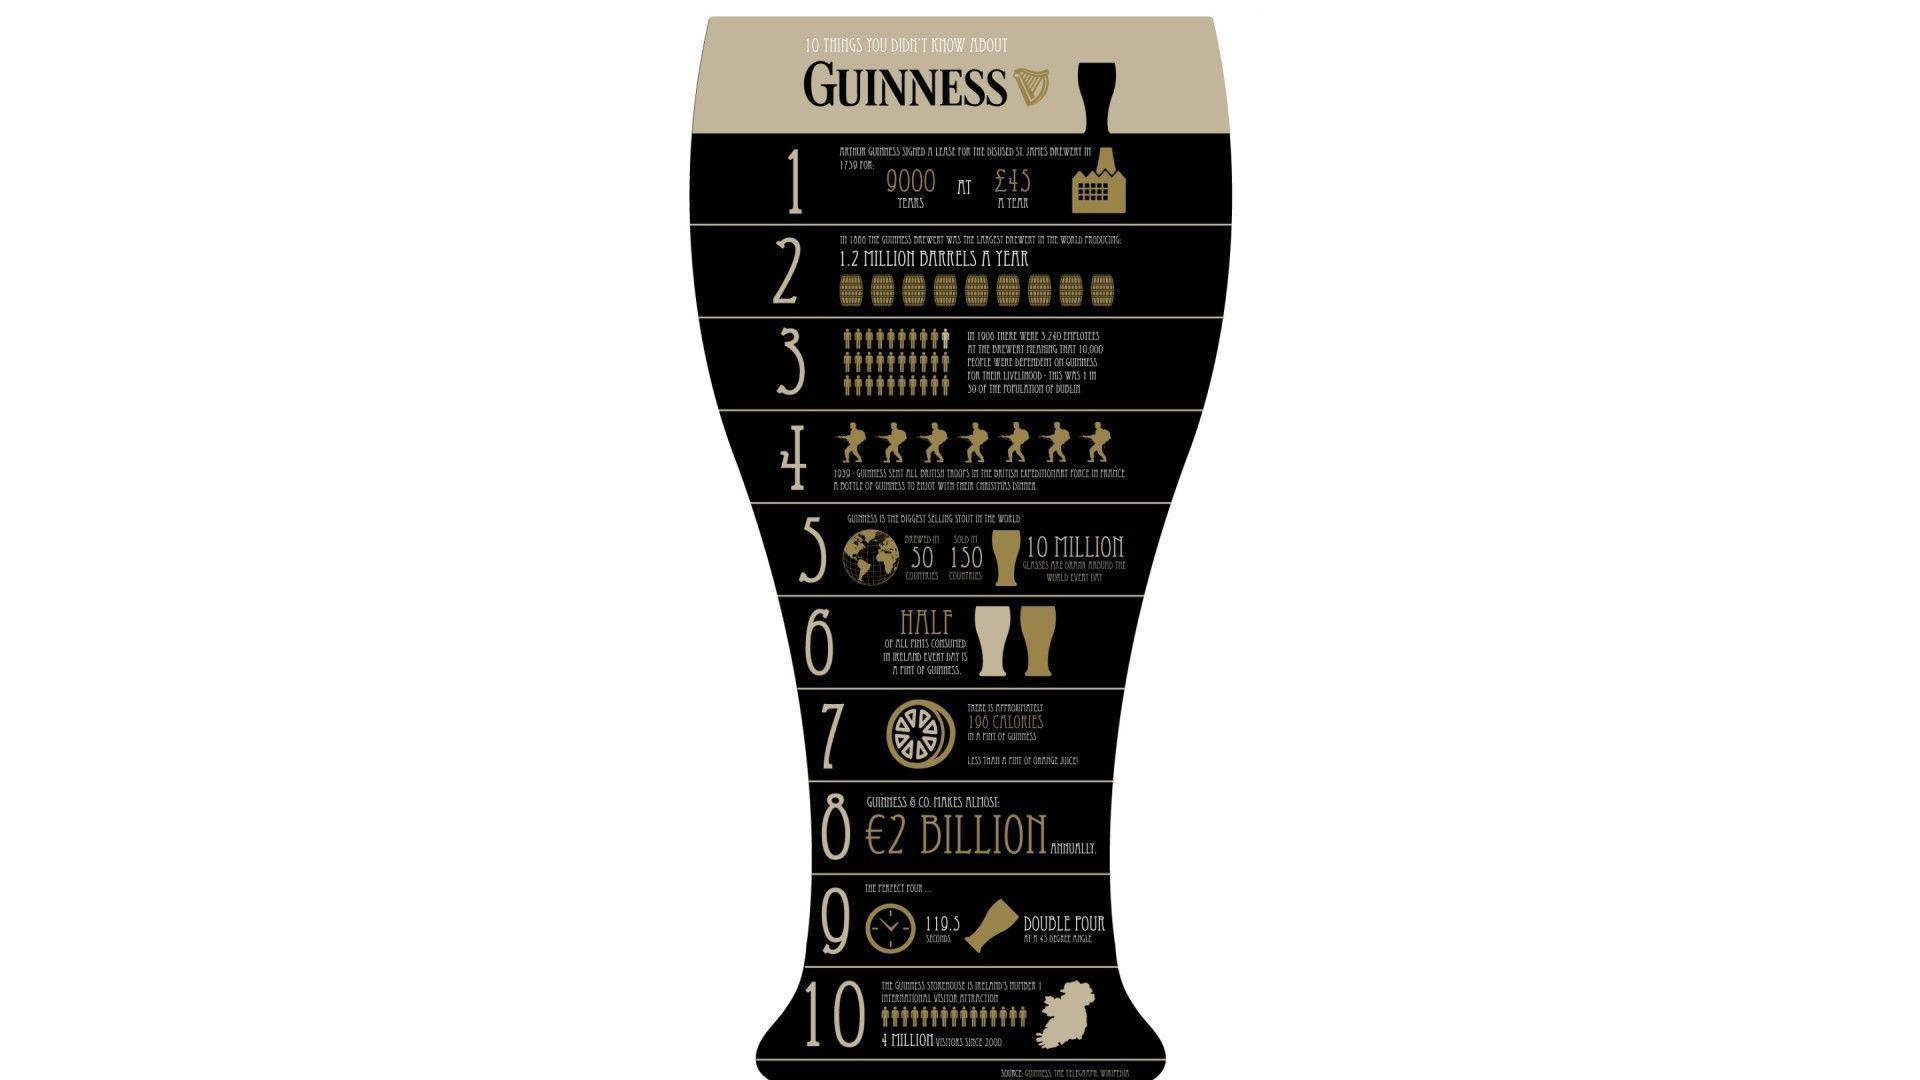 Download Creative Irish Dry Stout Guinness Infographic Wallpaper |  